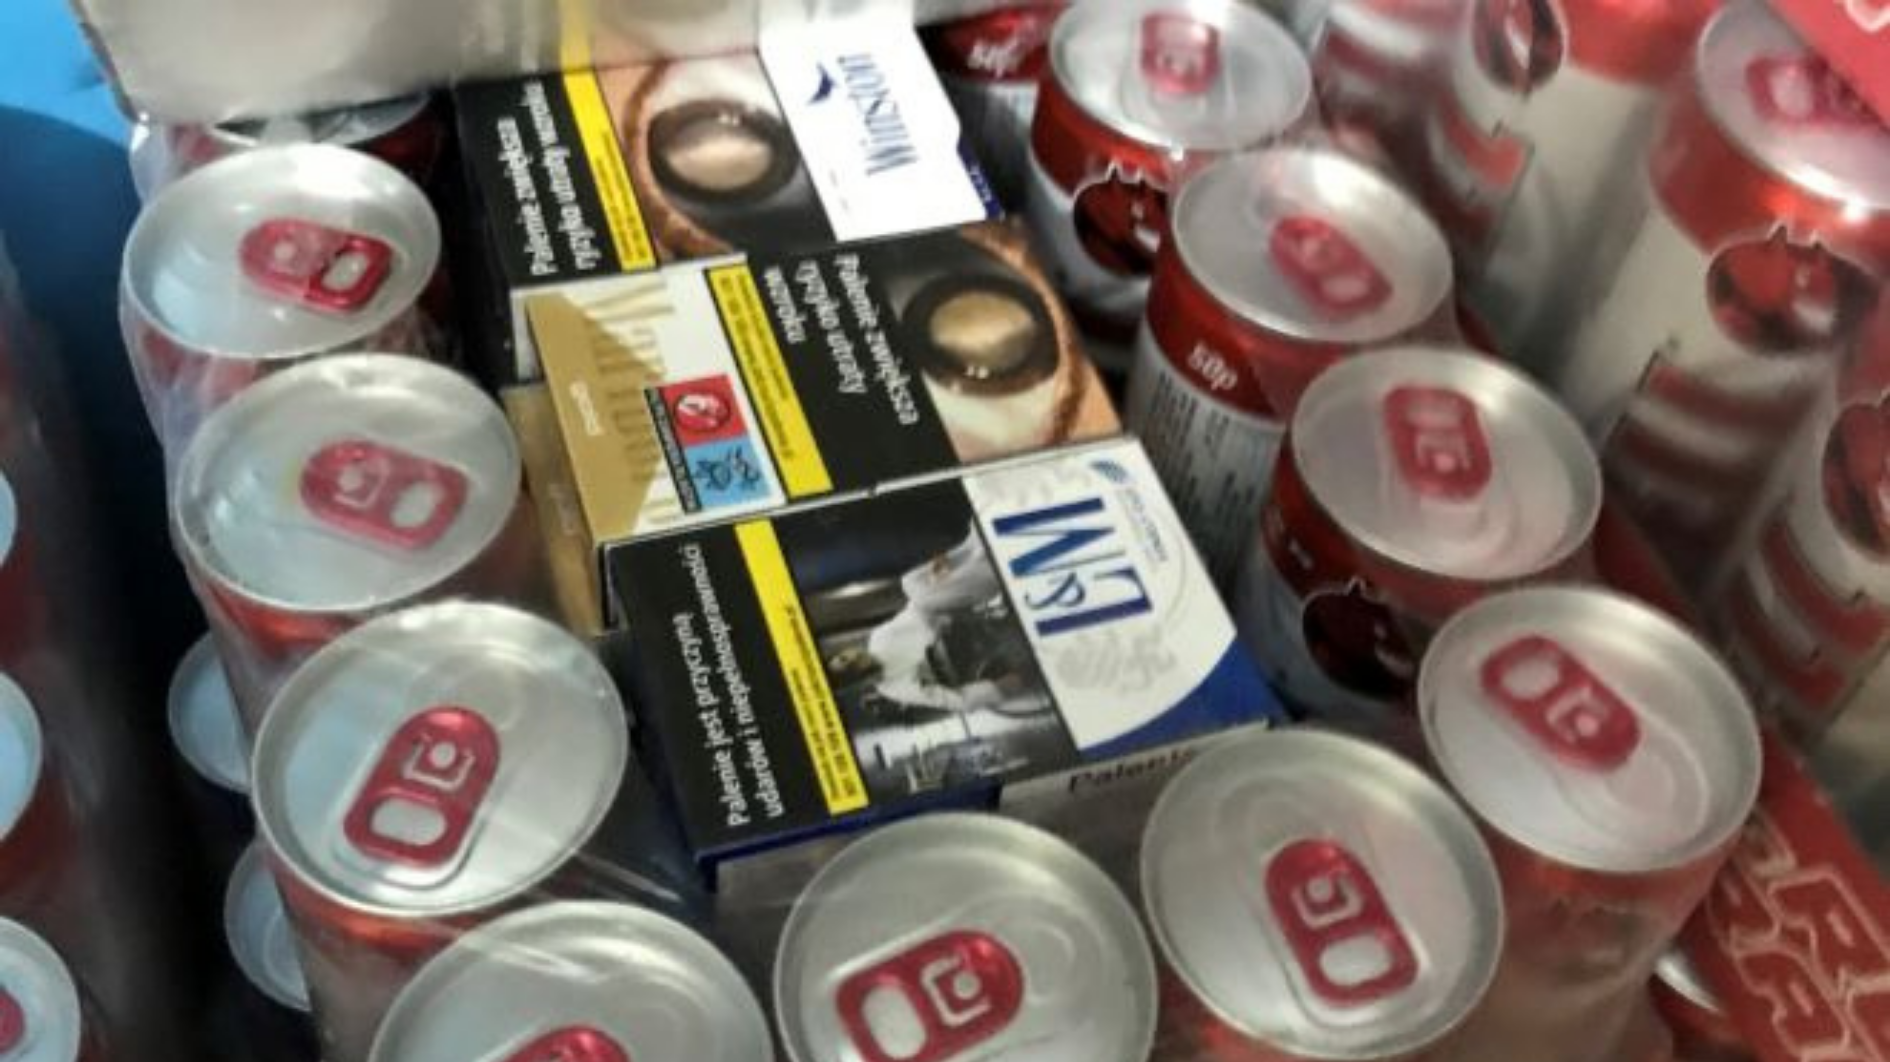 Image shows a case of soft drink cans, with illicit cigarette packets being hidden in the middle